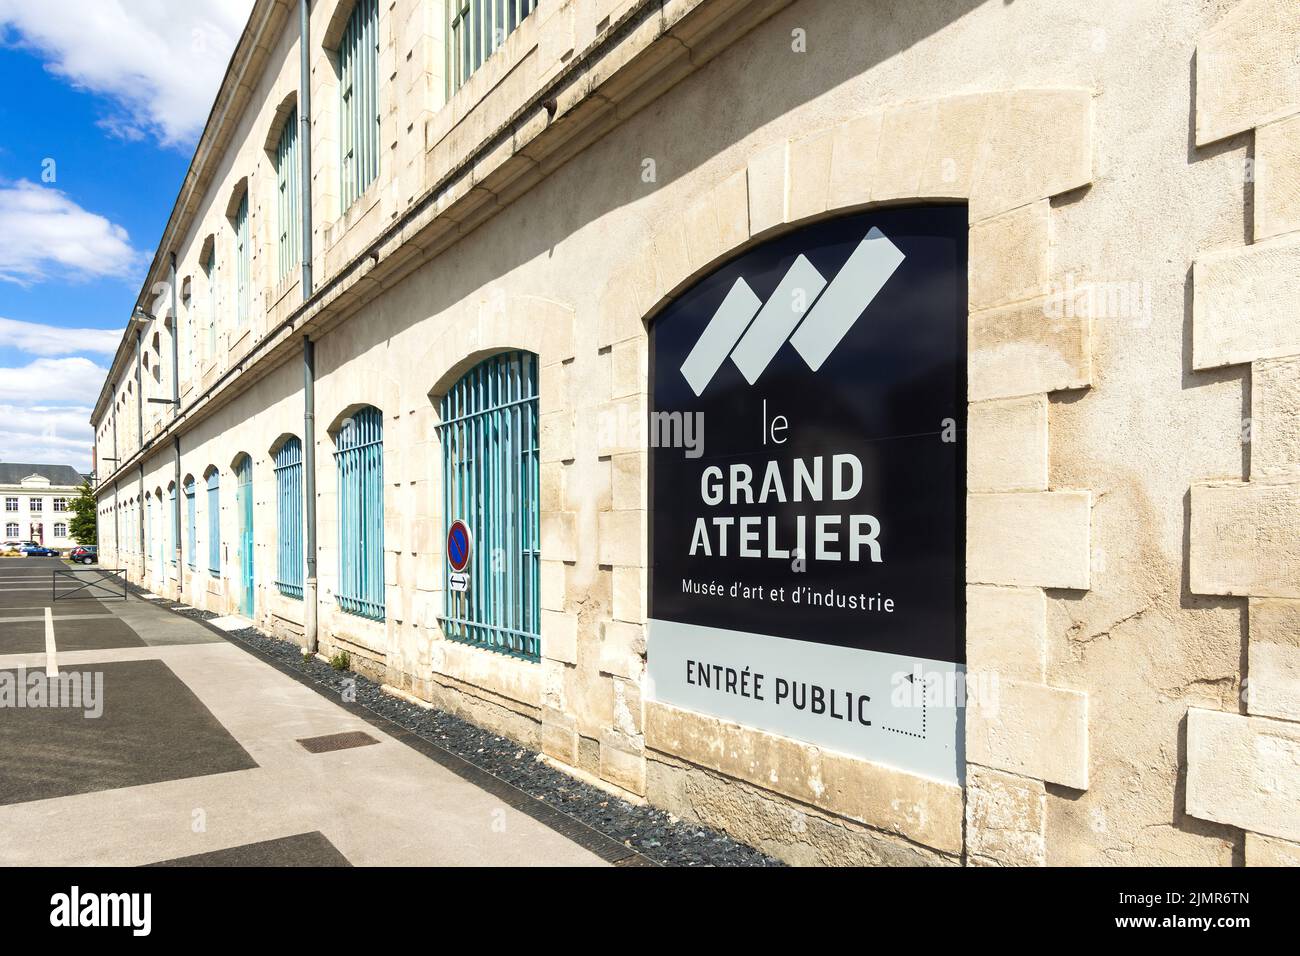 Exterior of former armaments factory converted to transport museum, Chatellerault, Vienne (86), France. Stock Photo